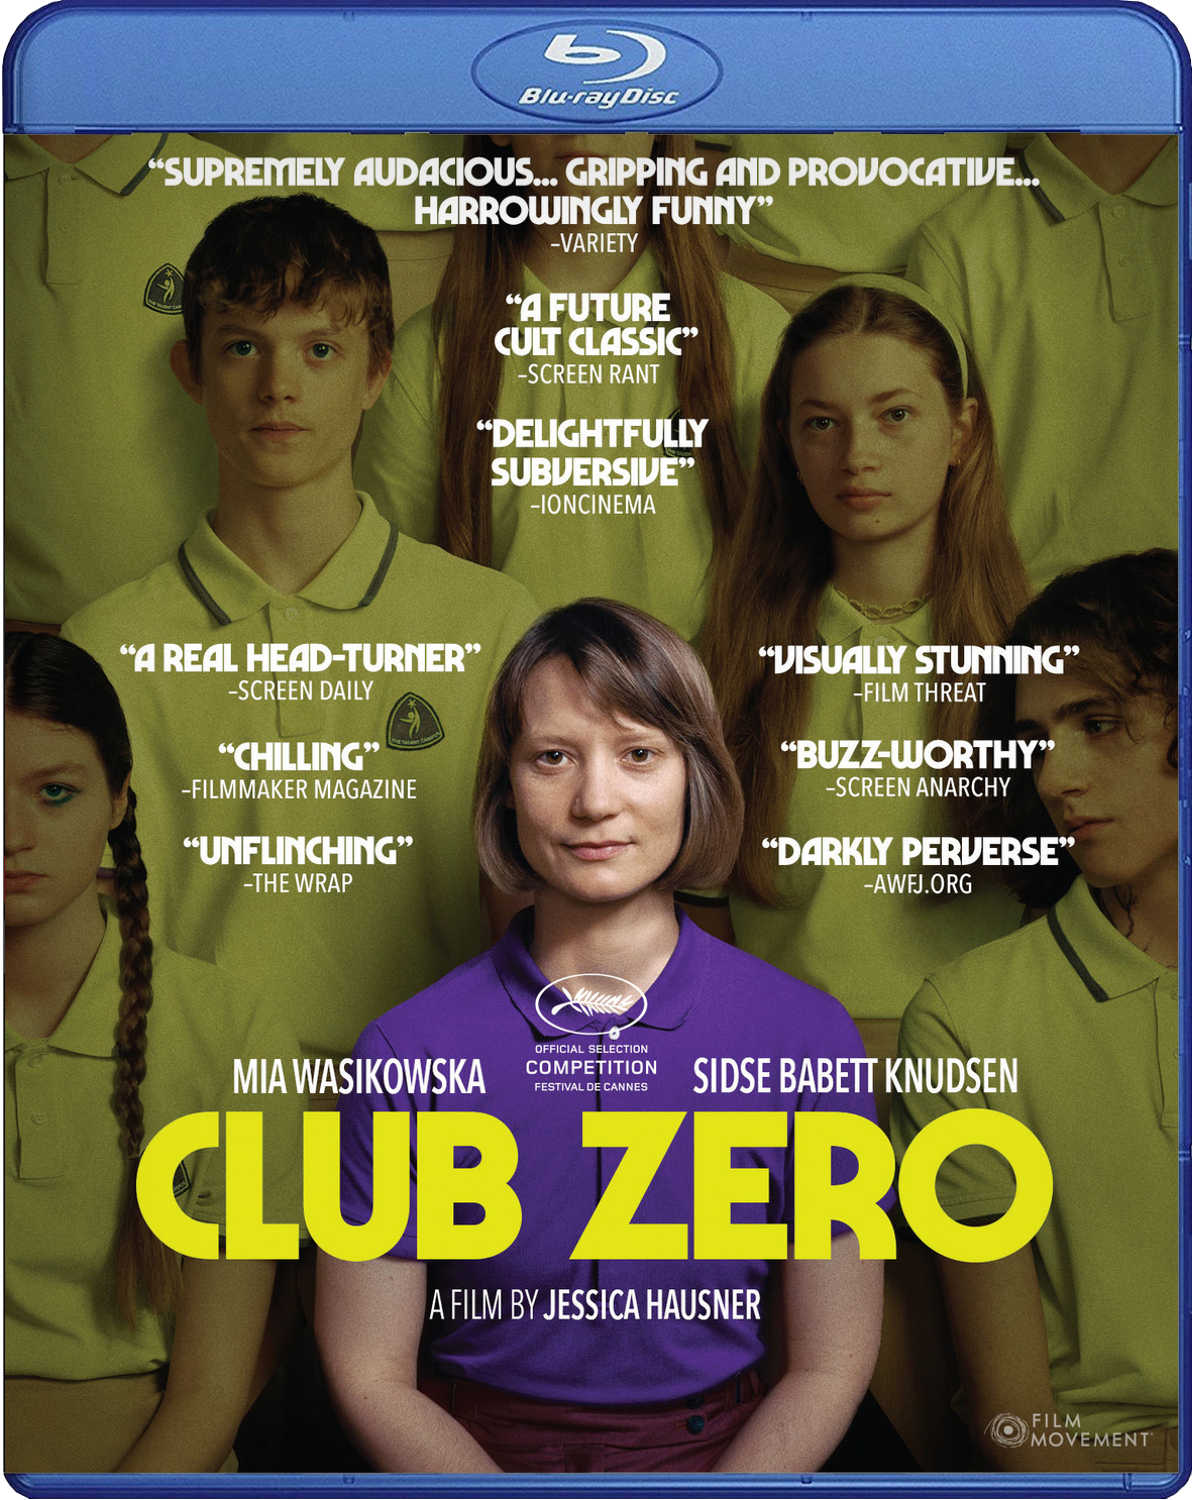 Unveil the shocking depths of manipulation in the chilling thriller, Club Zero. This thought-provoking film explores themes of eating disorders, cult indoctrination, and the fragility of the teenage mind.